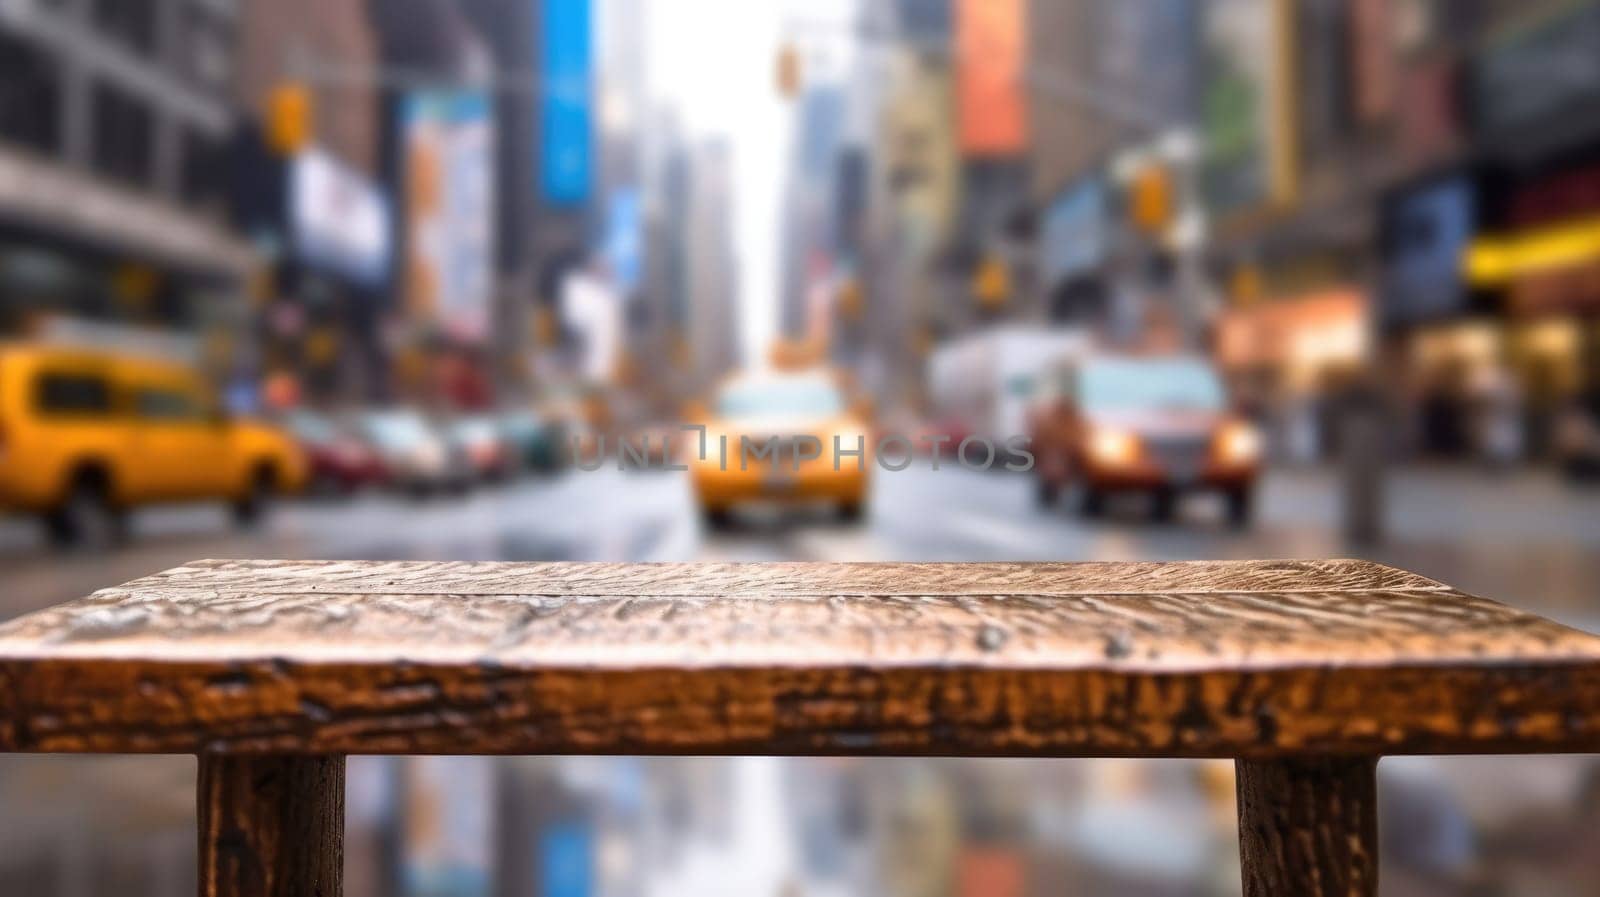 The empty wooden table top with blur background of NYC street. Exuberant image.